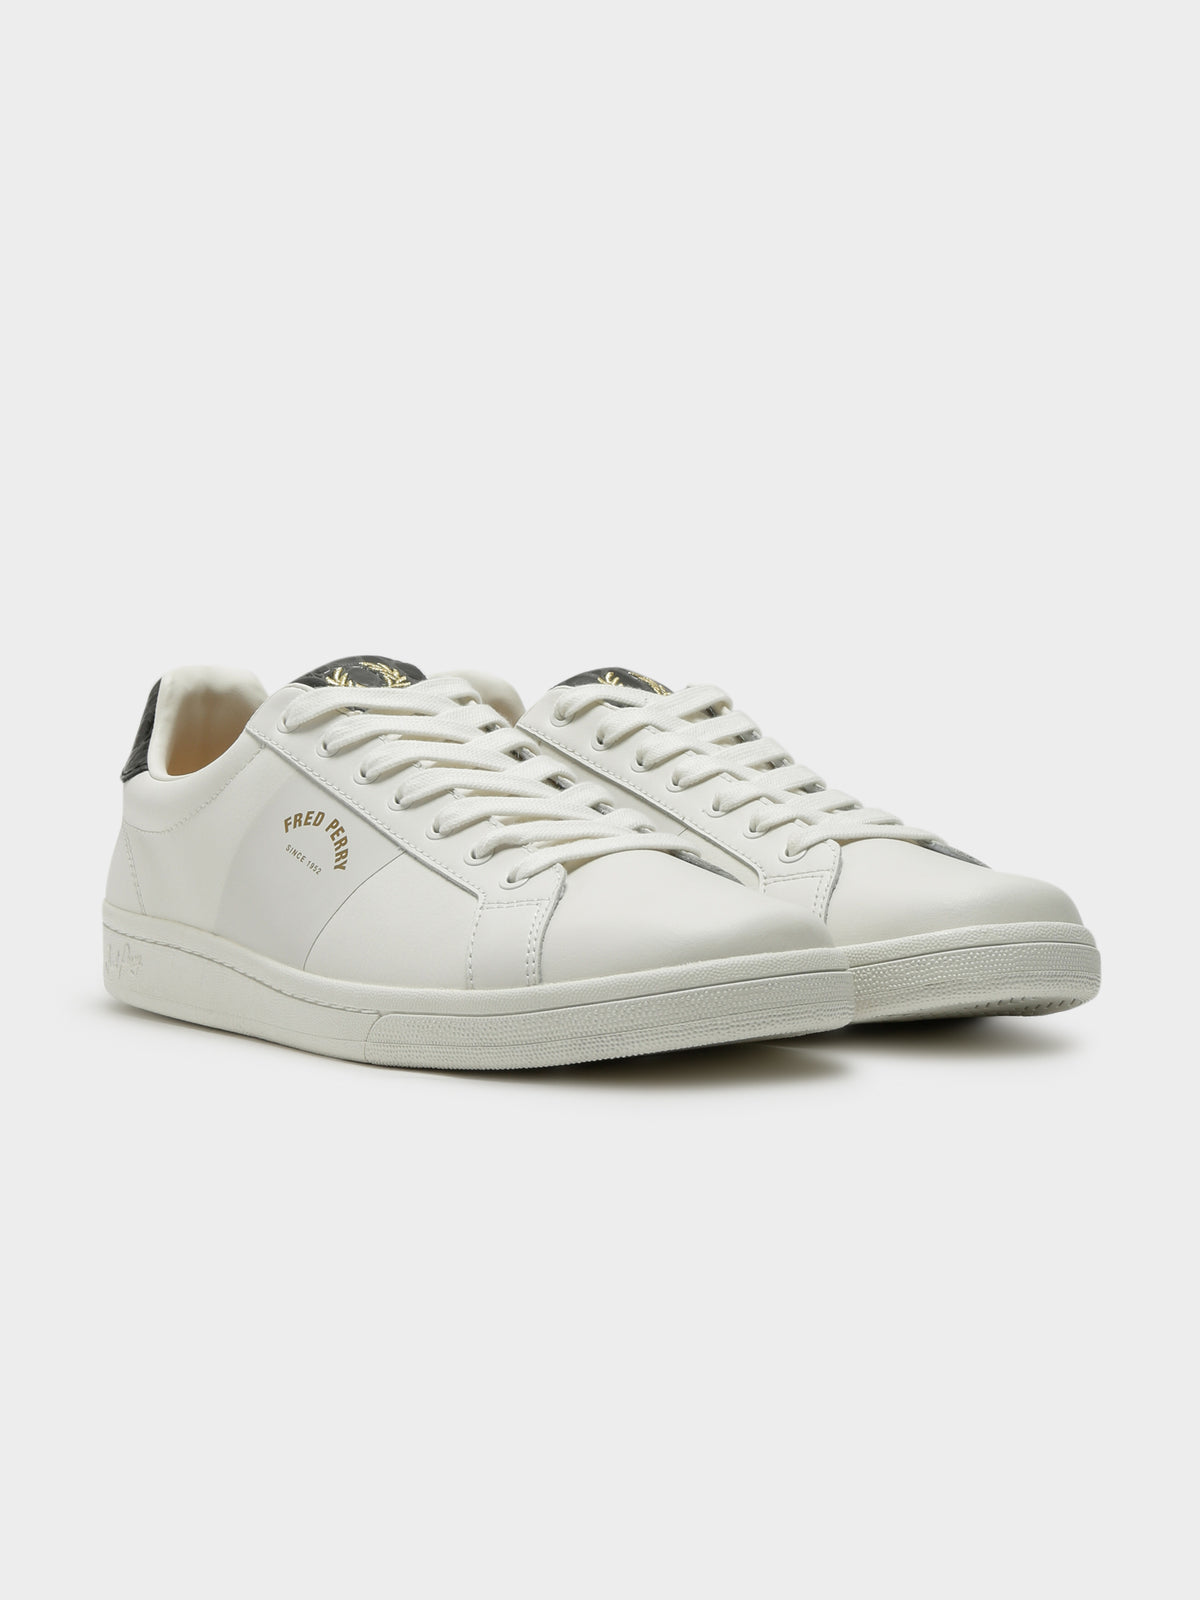 B721 Leather Arch Branded Sneakers in Snow White